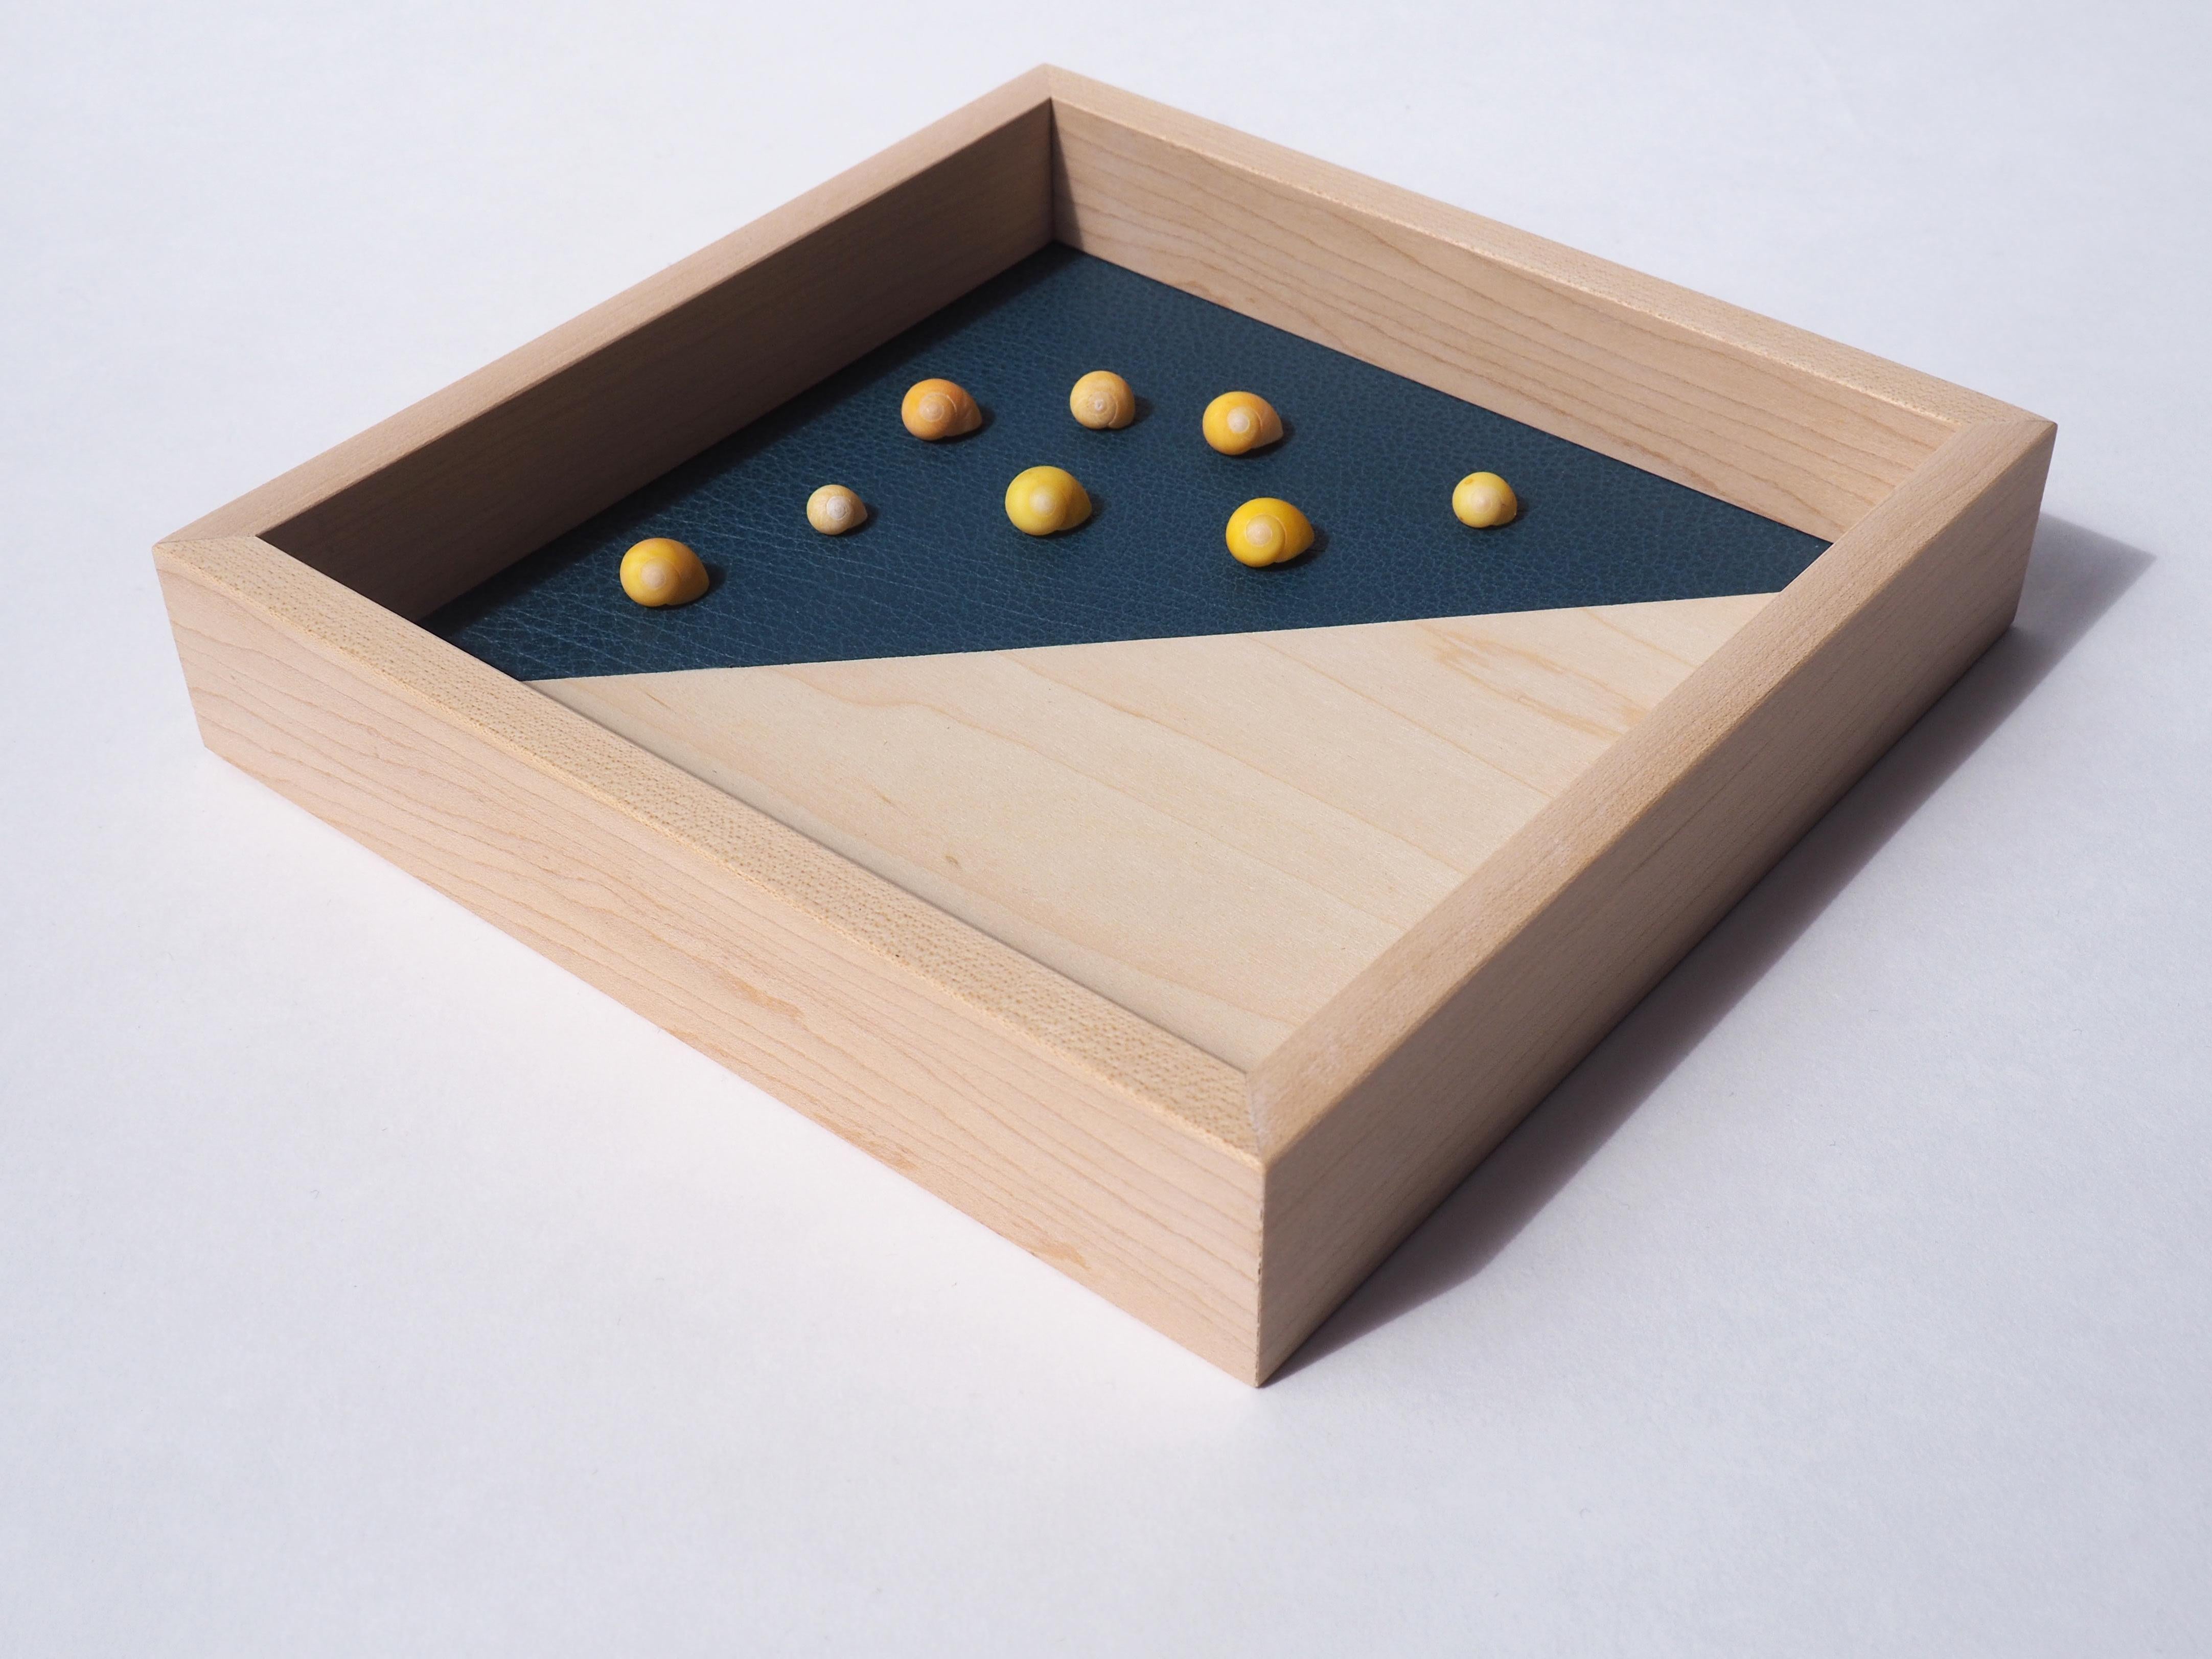 Handcrafted in solid wood, this storage tray decorates as much as it is practical.
A mix of massive maple wood and blue leather are worked here like marquetry, meticulously so that there is no difference in level to the touch.

Perfect for storing